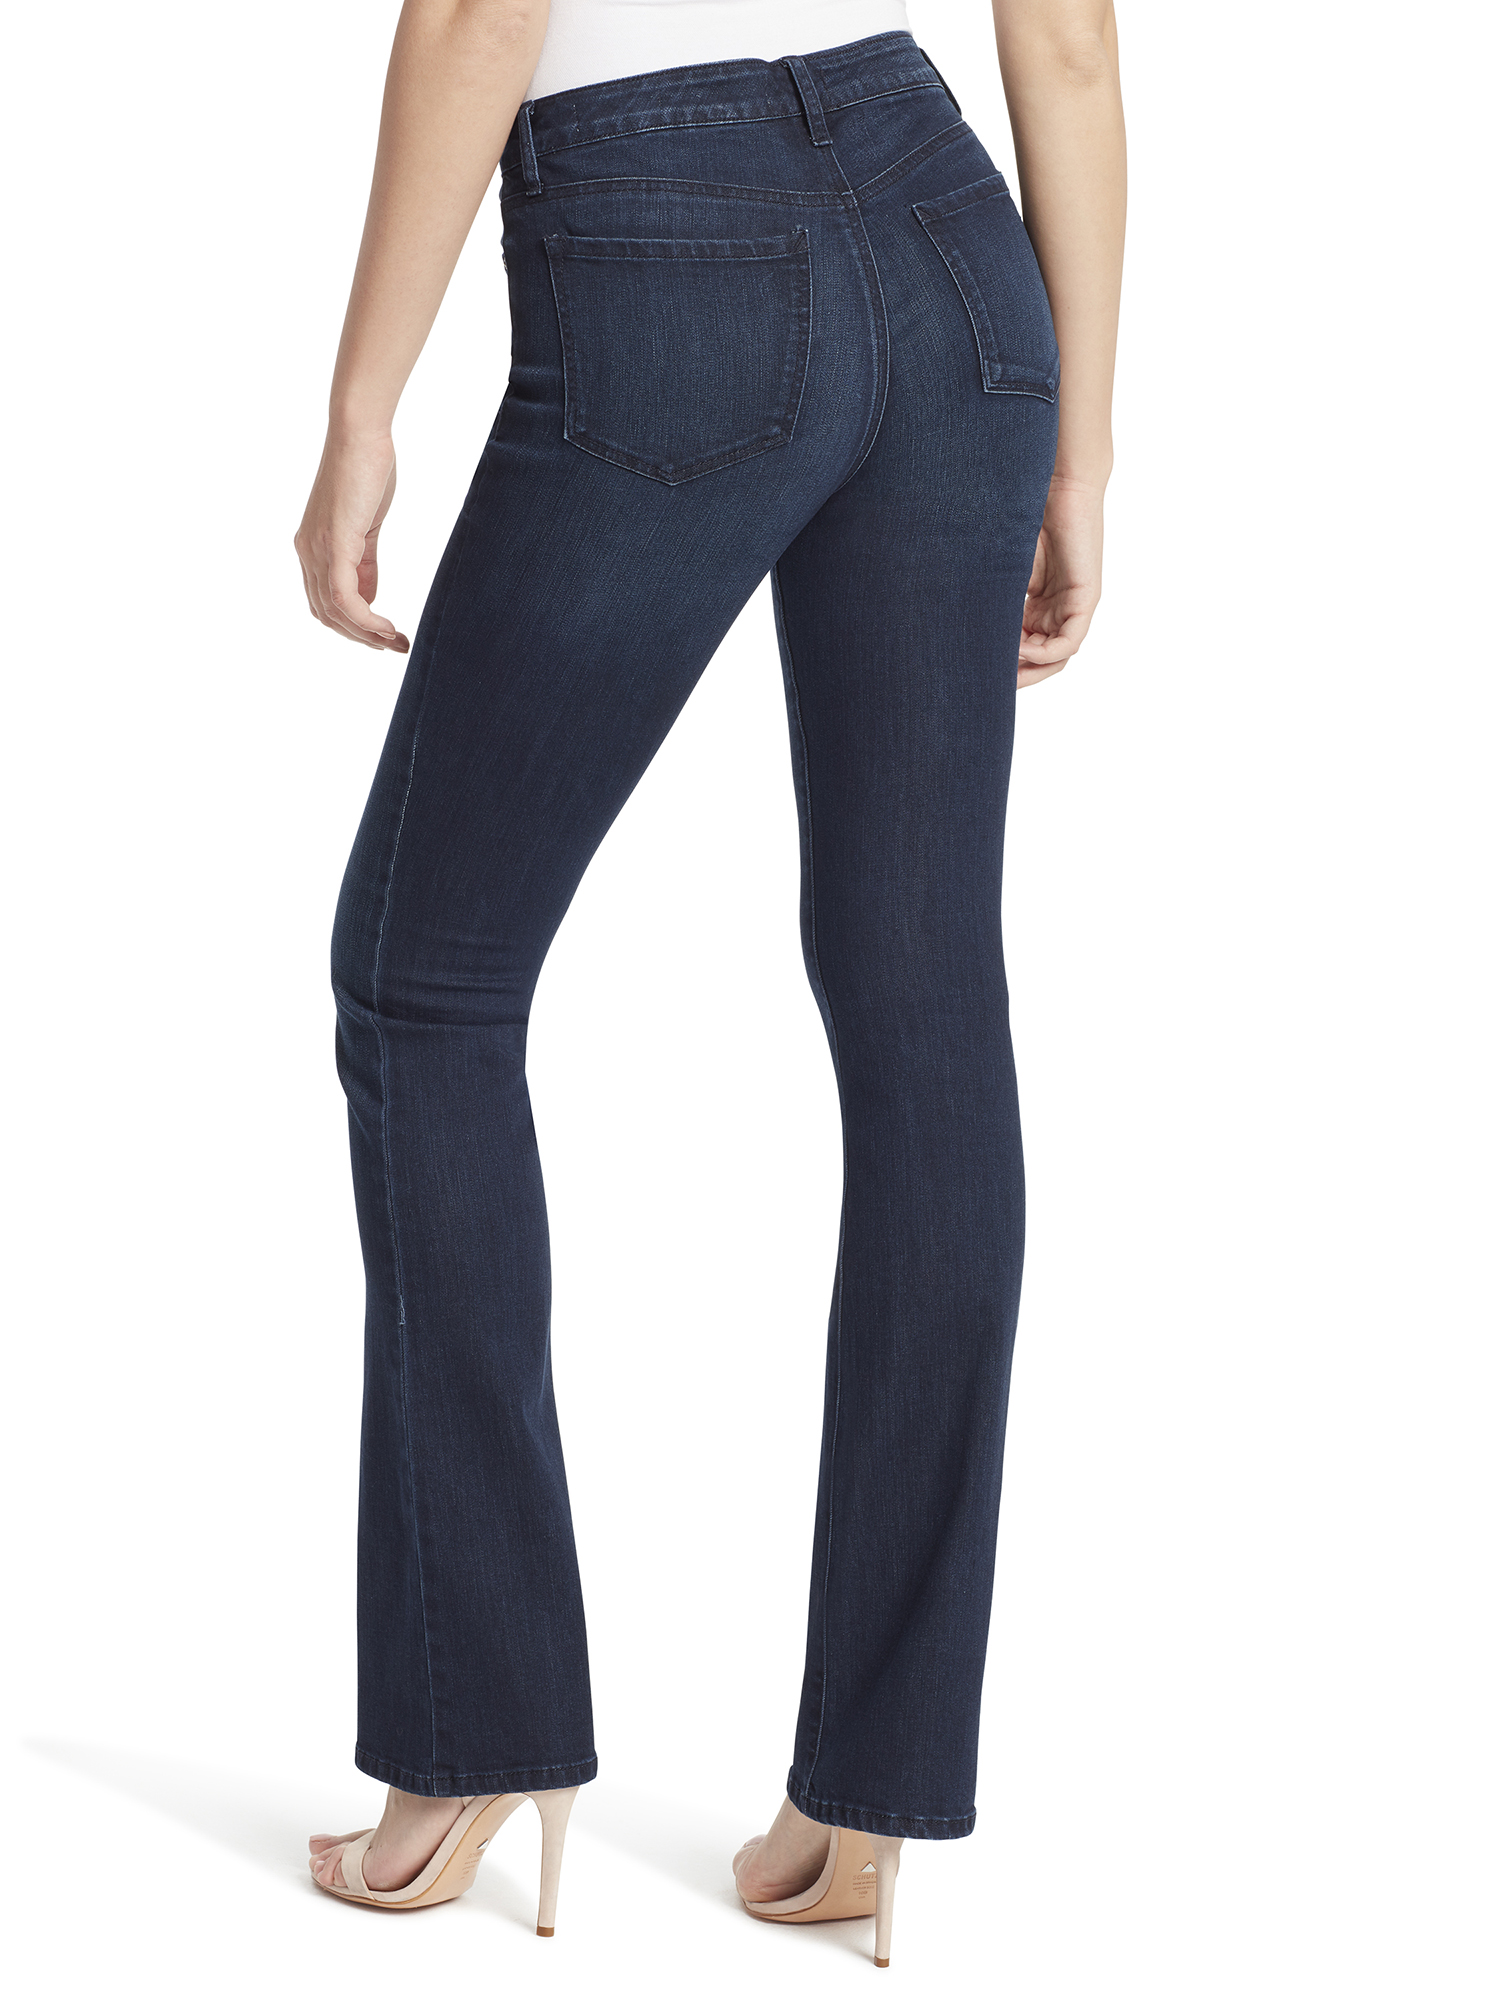 Jessica Simpson Women's Truly Yours Bootcut Jean - image 2 of 4